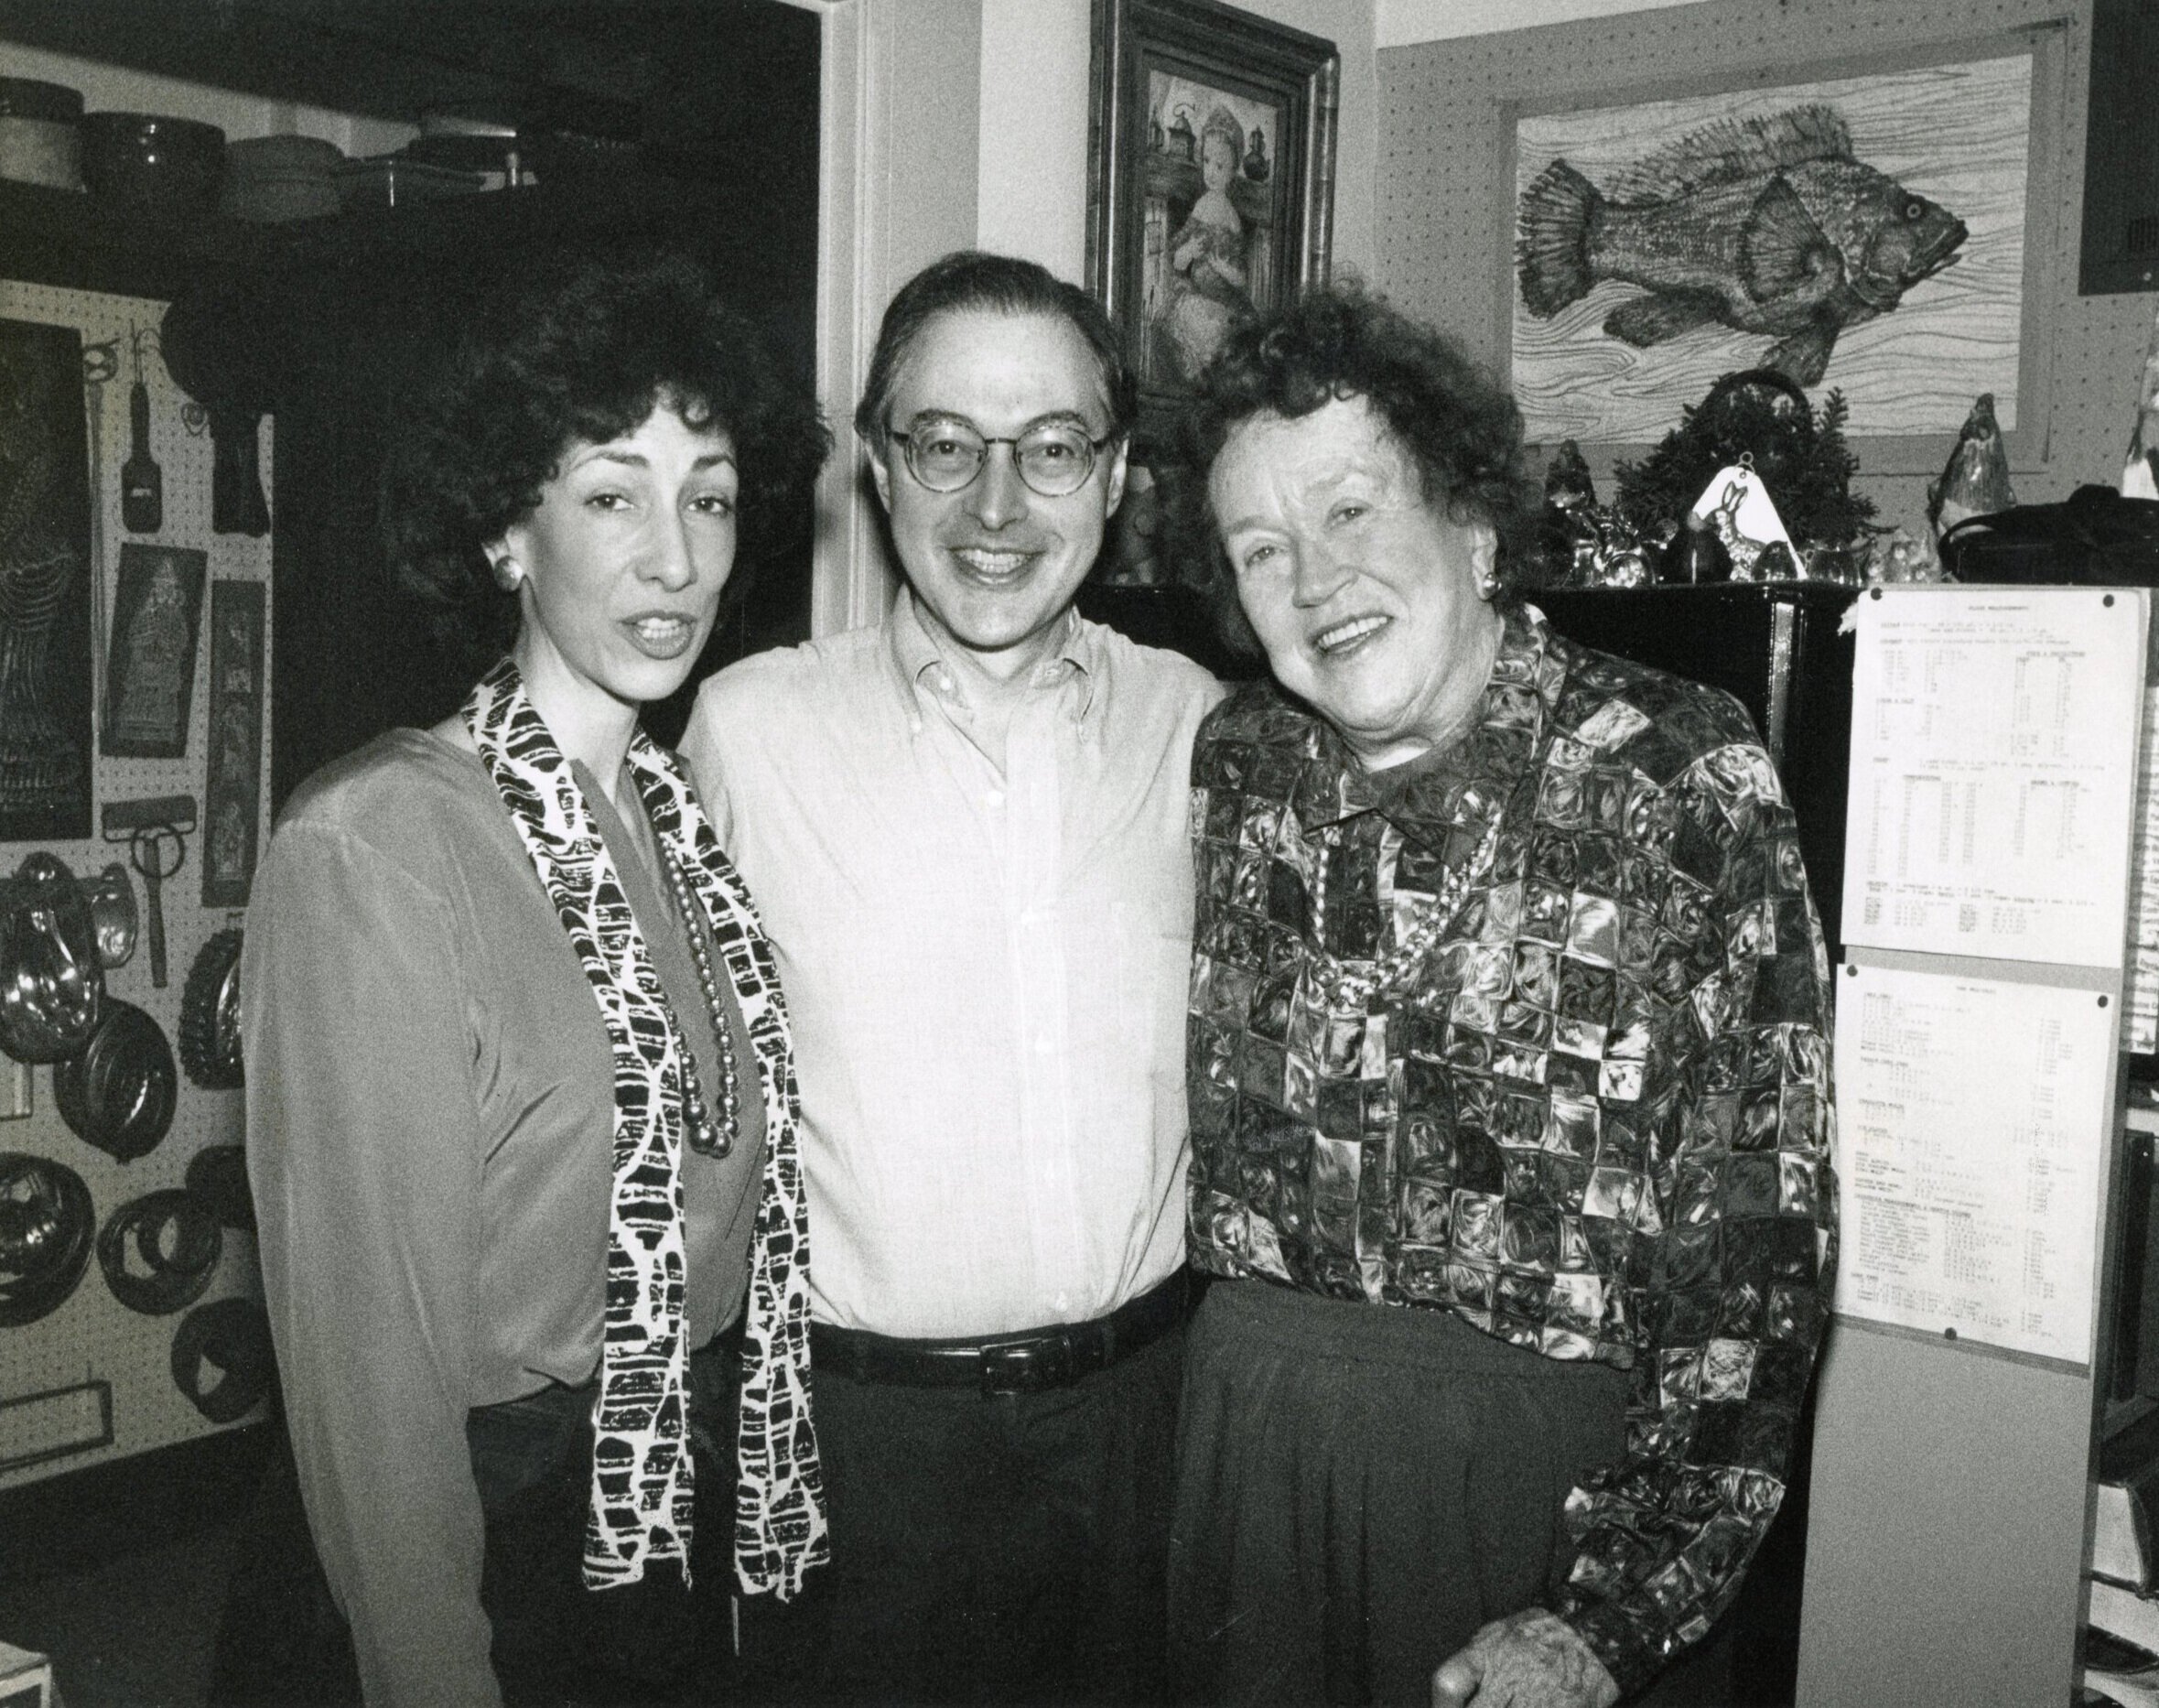  Rg, MW and Julia Child at her home in Cambridge MA 